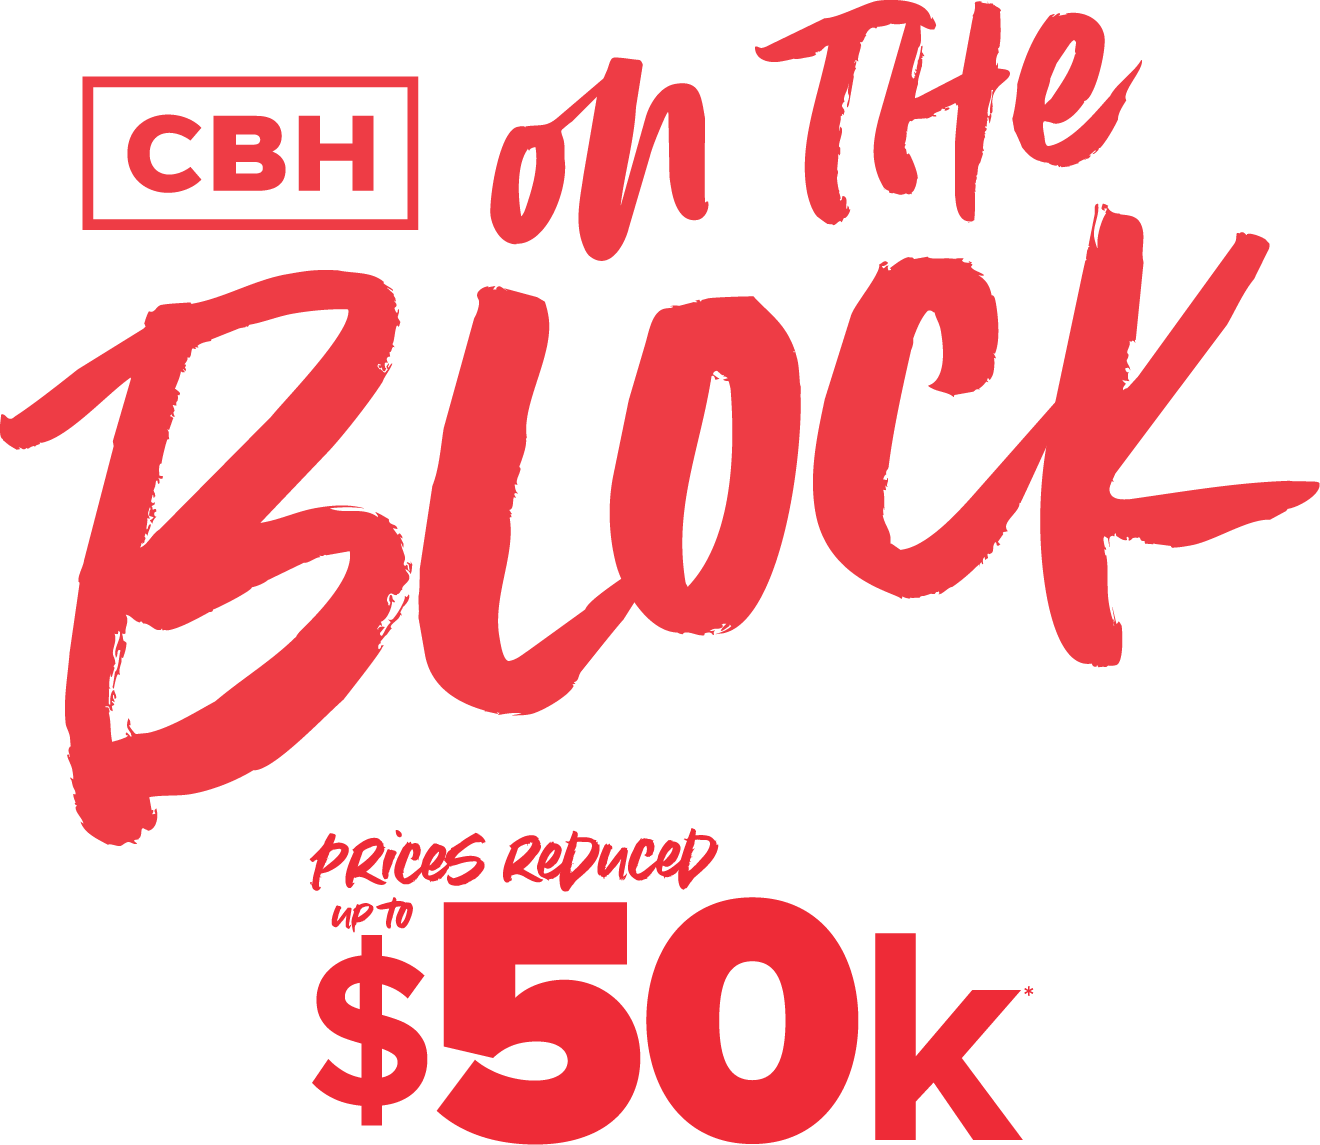 CBH On the Block, prices reduced up to 50k*